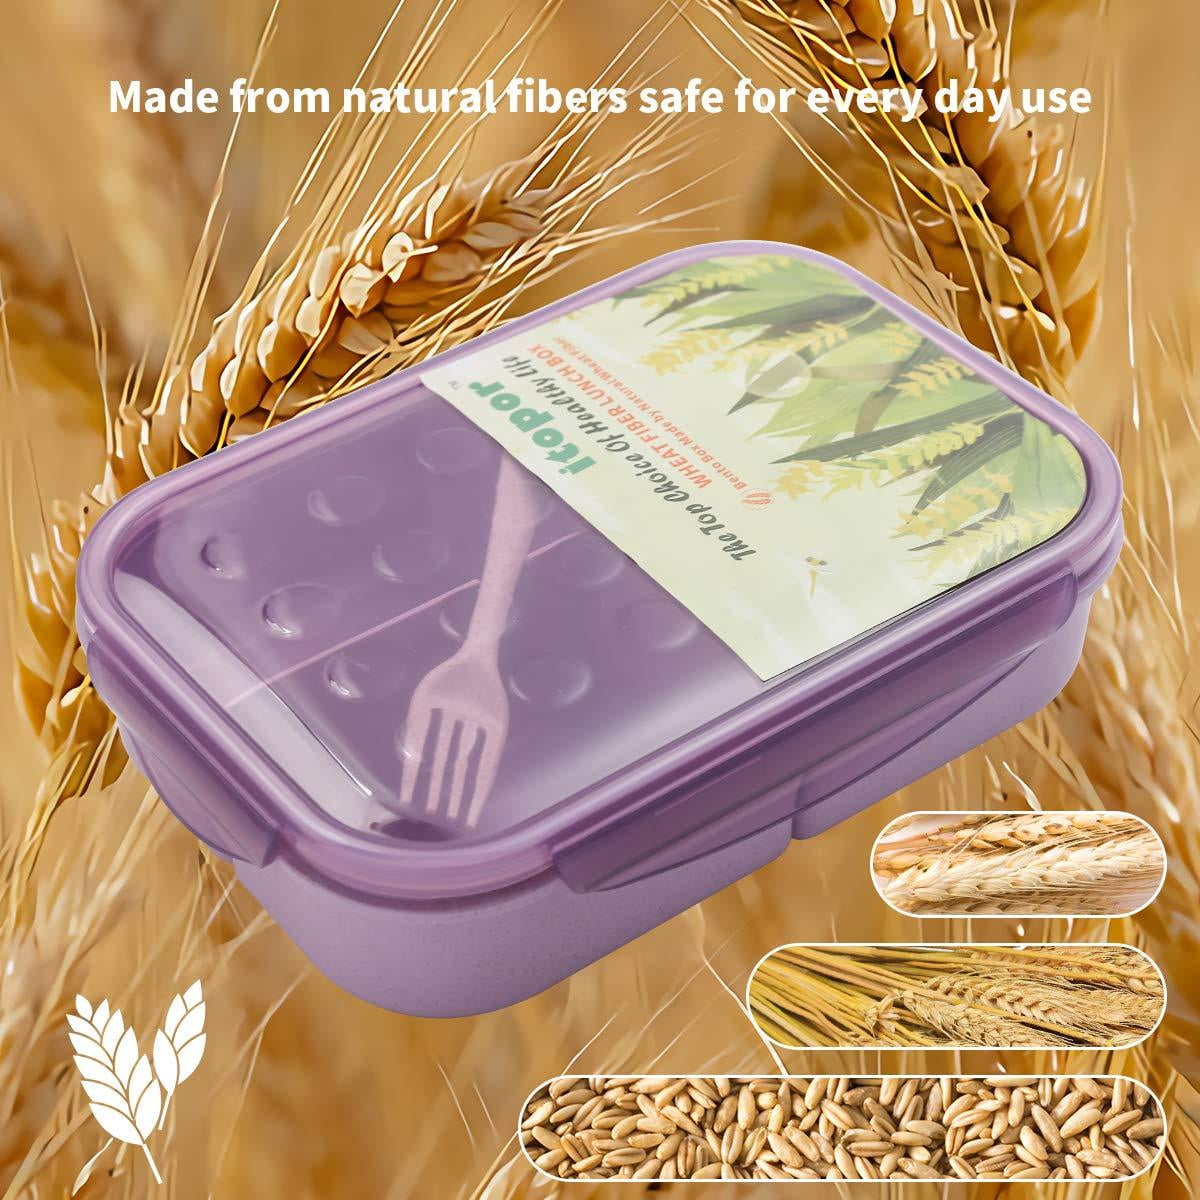 Itopor® Lunch Box,Natural Wheat Fiber Materials,Ideal Bento Box for Kids  and Adults,Leak Proof Kids …See more Itopor® Lunch Box,Natural Wheat Fiber